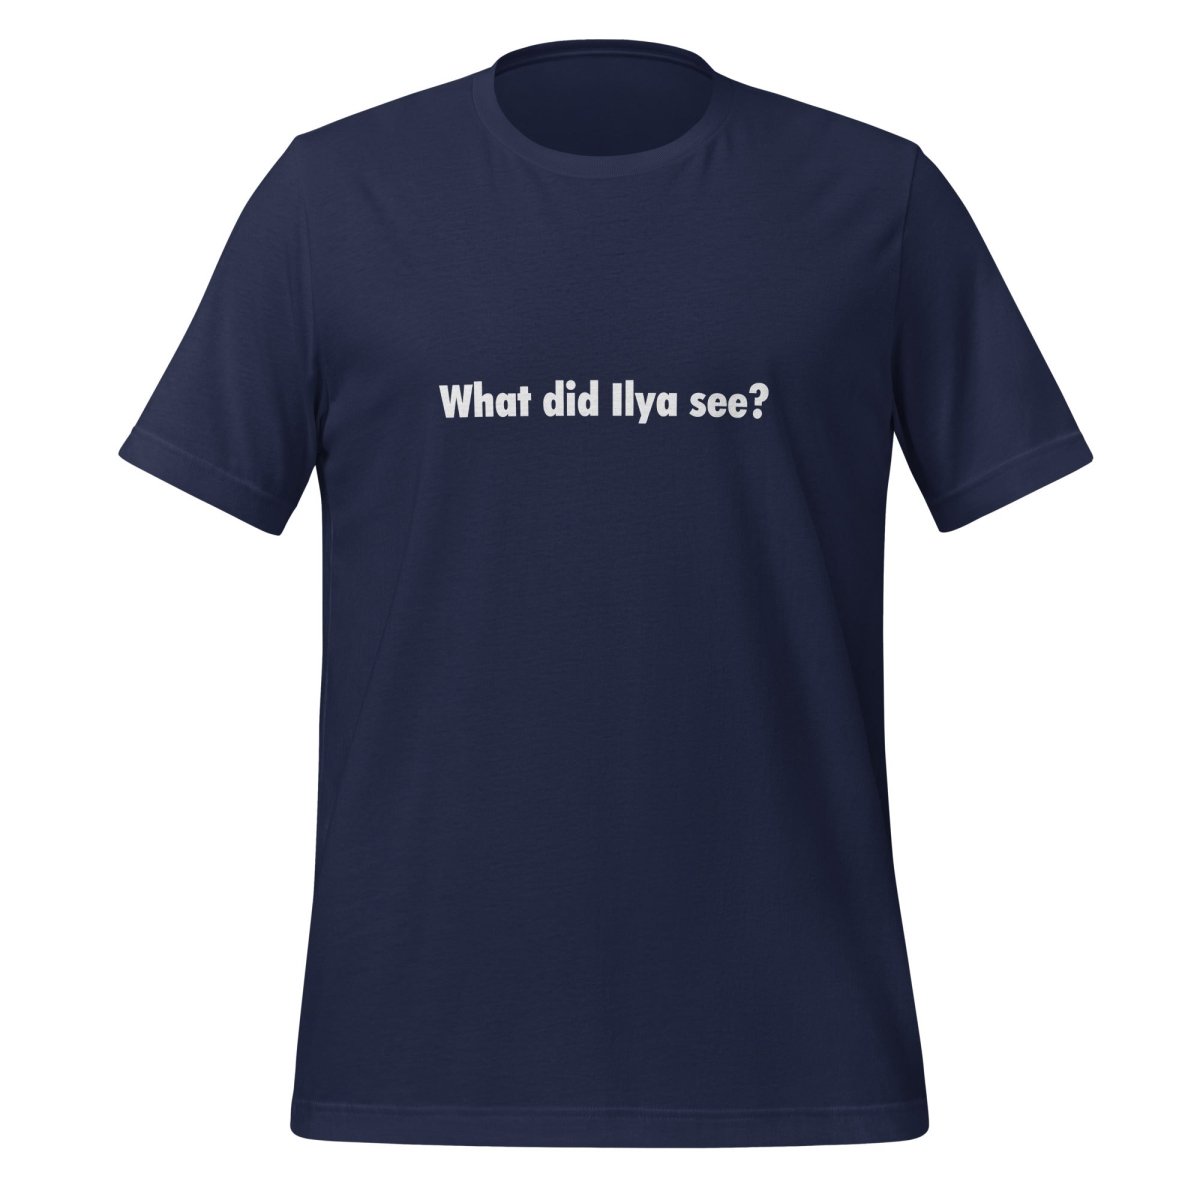 What did Ilya see? T - Shirt 3 (unisex) - Navy - AI Store